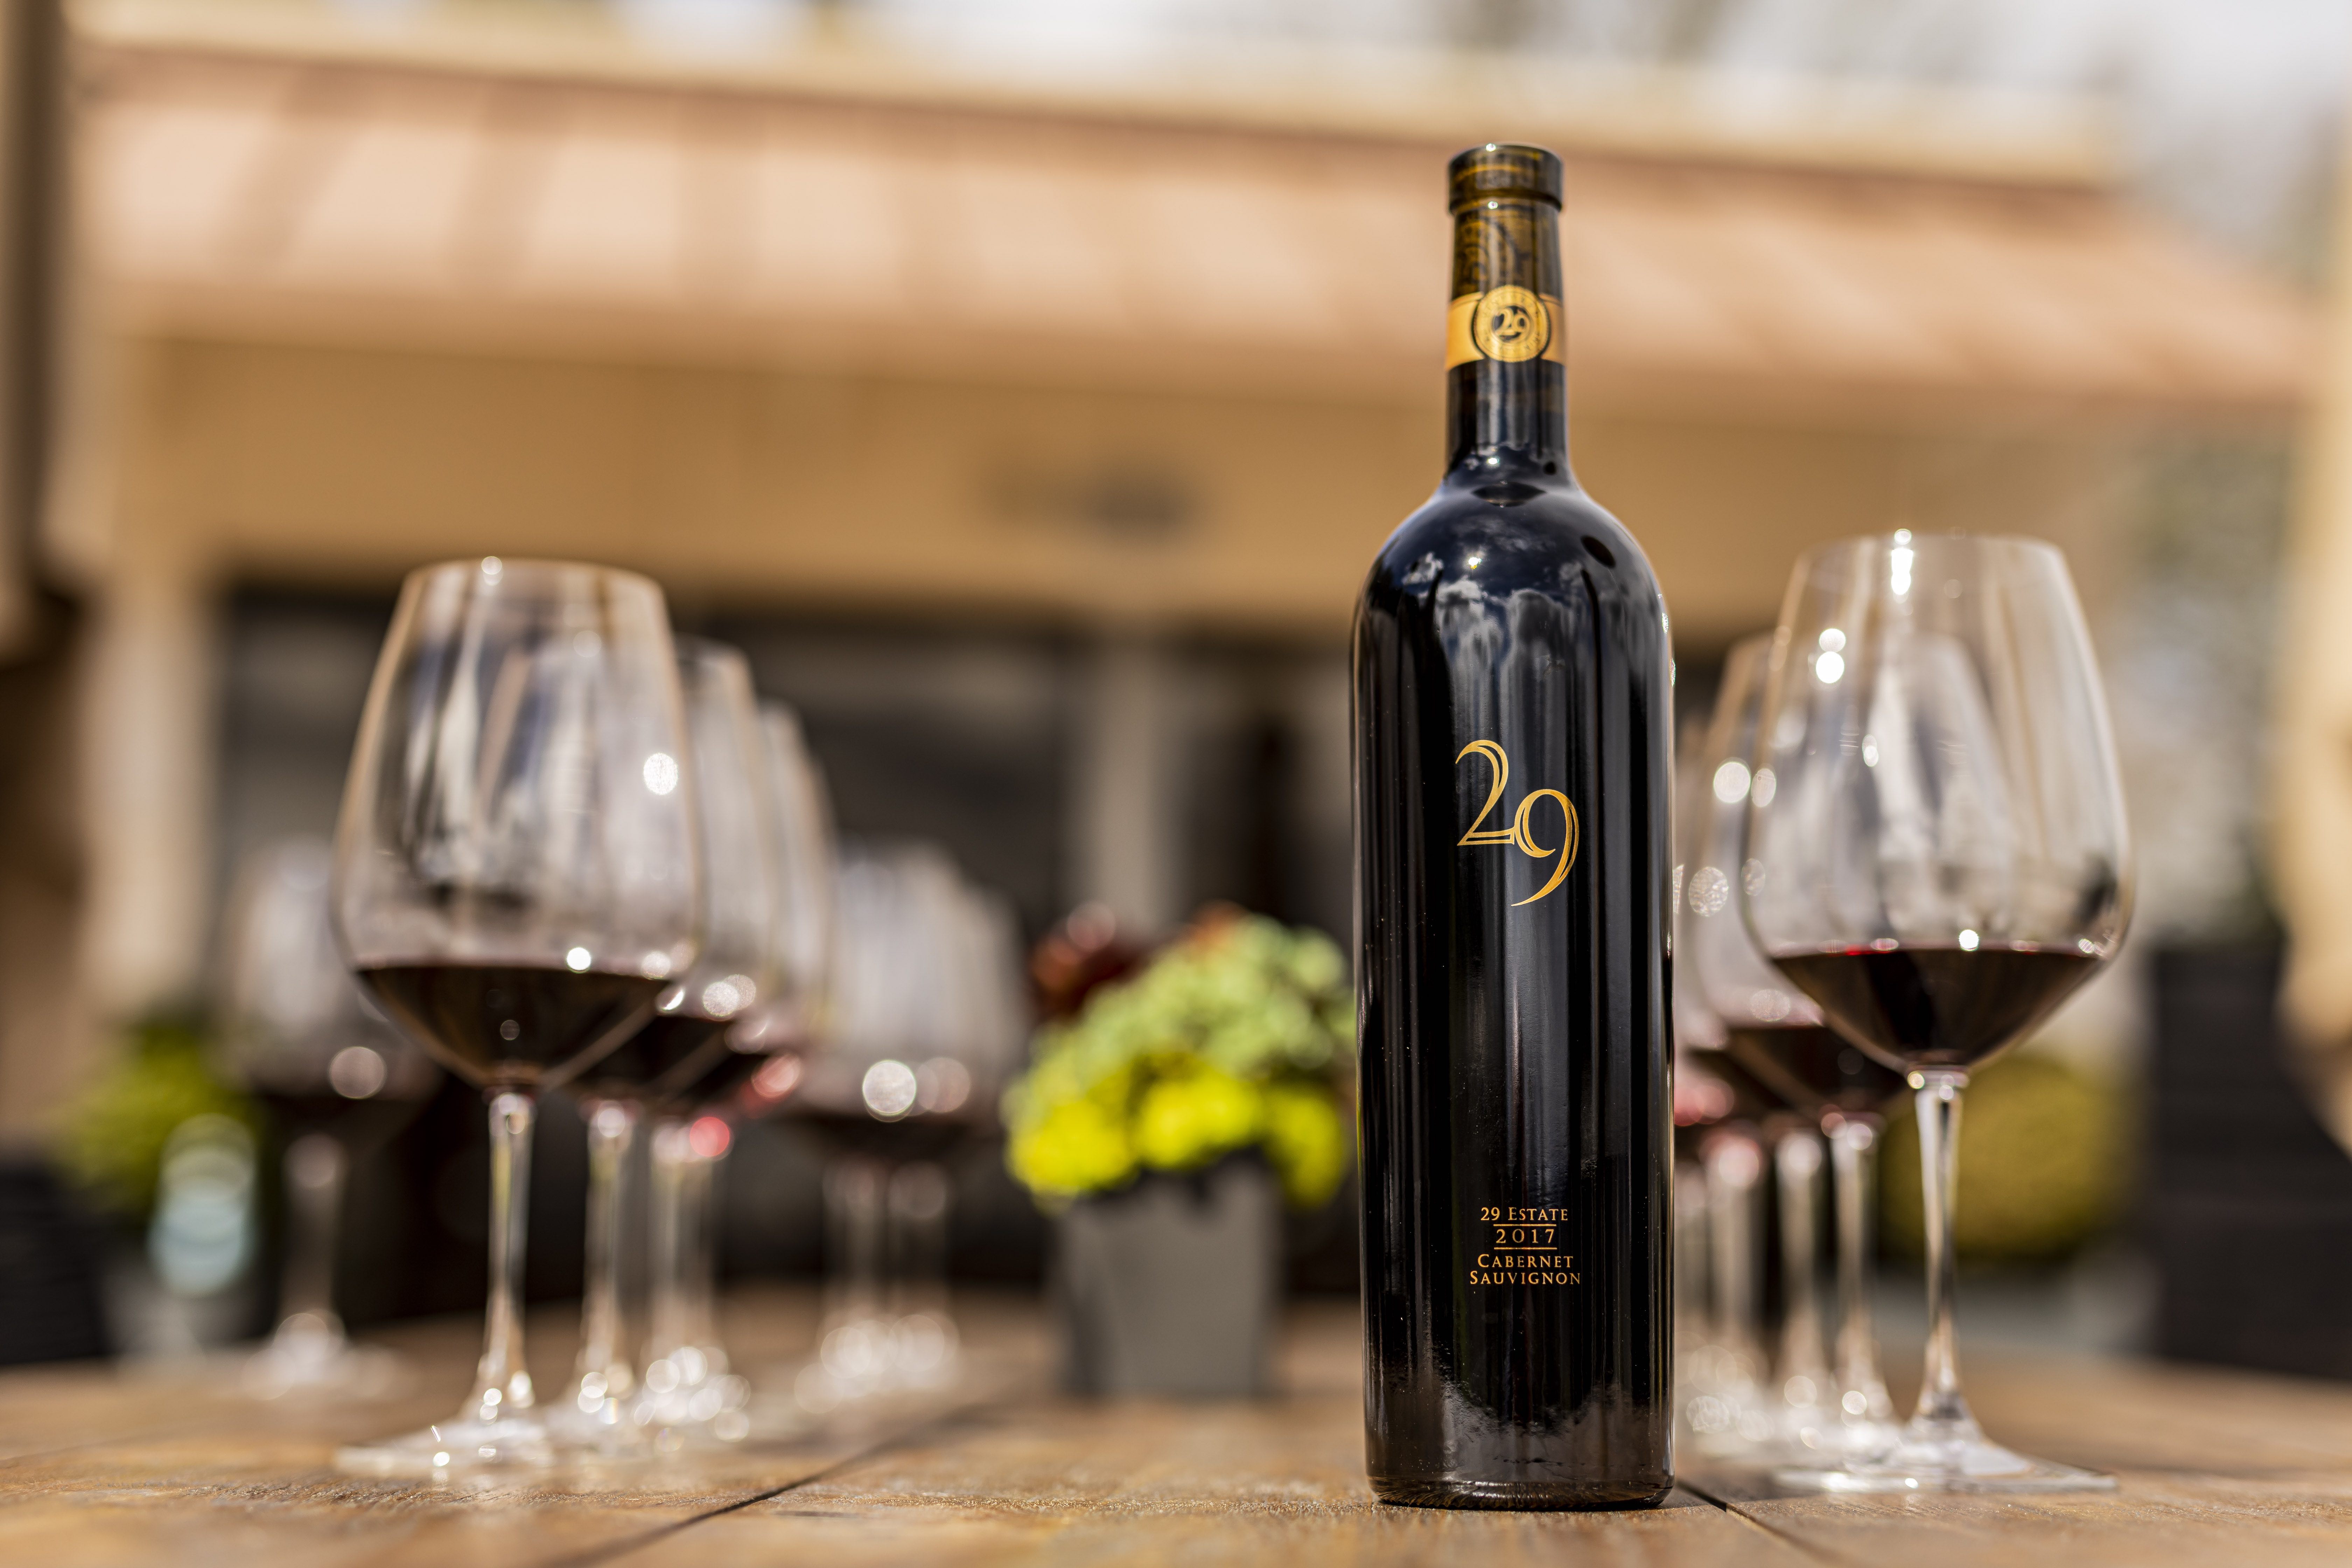 Vineyard 29 makes exceptional Napa Valley Cabernet Sauvignon from estate vineyards, including the 29 Estate and Aida Estate in St. Helena.